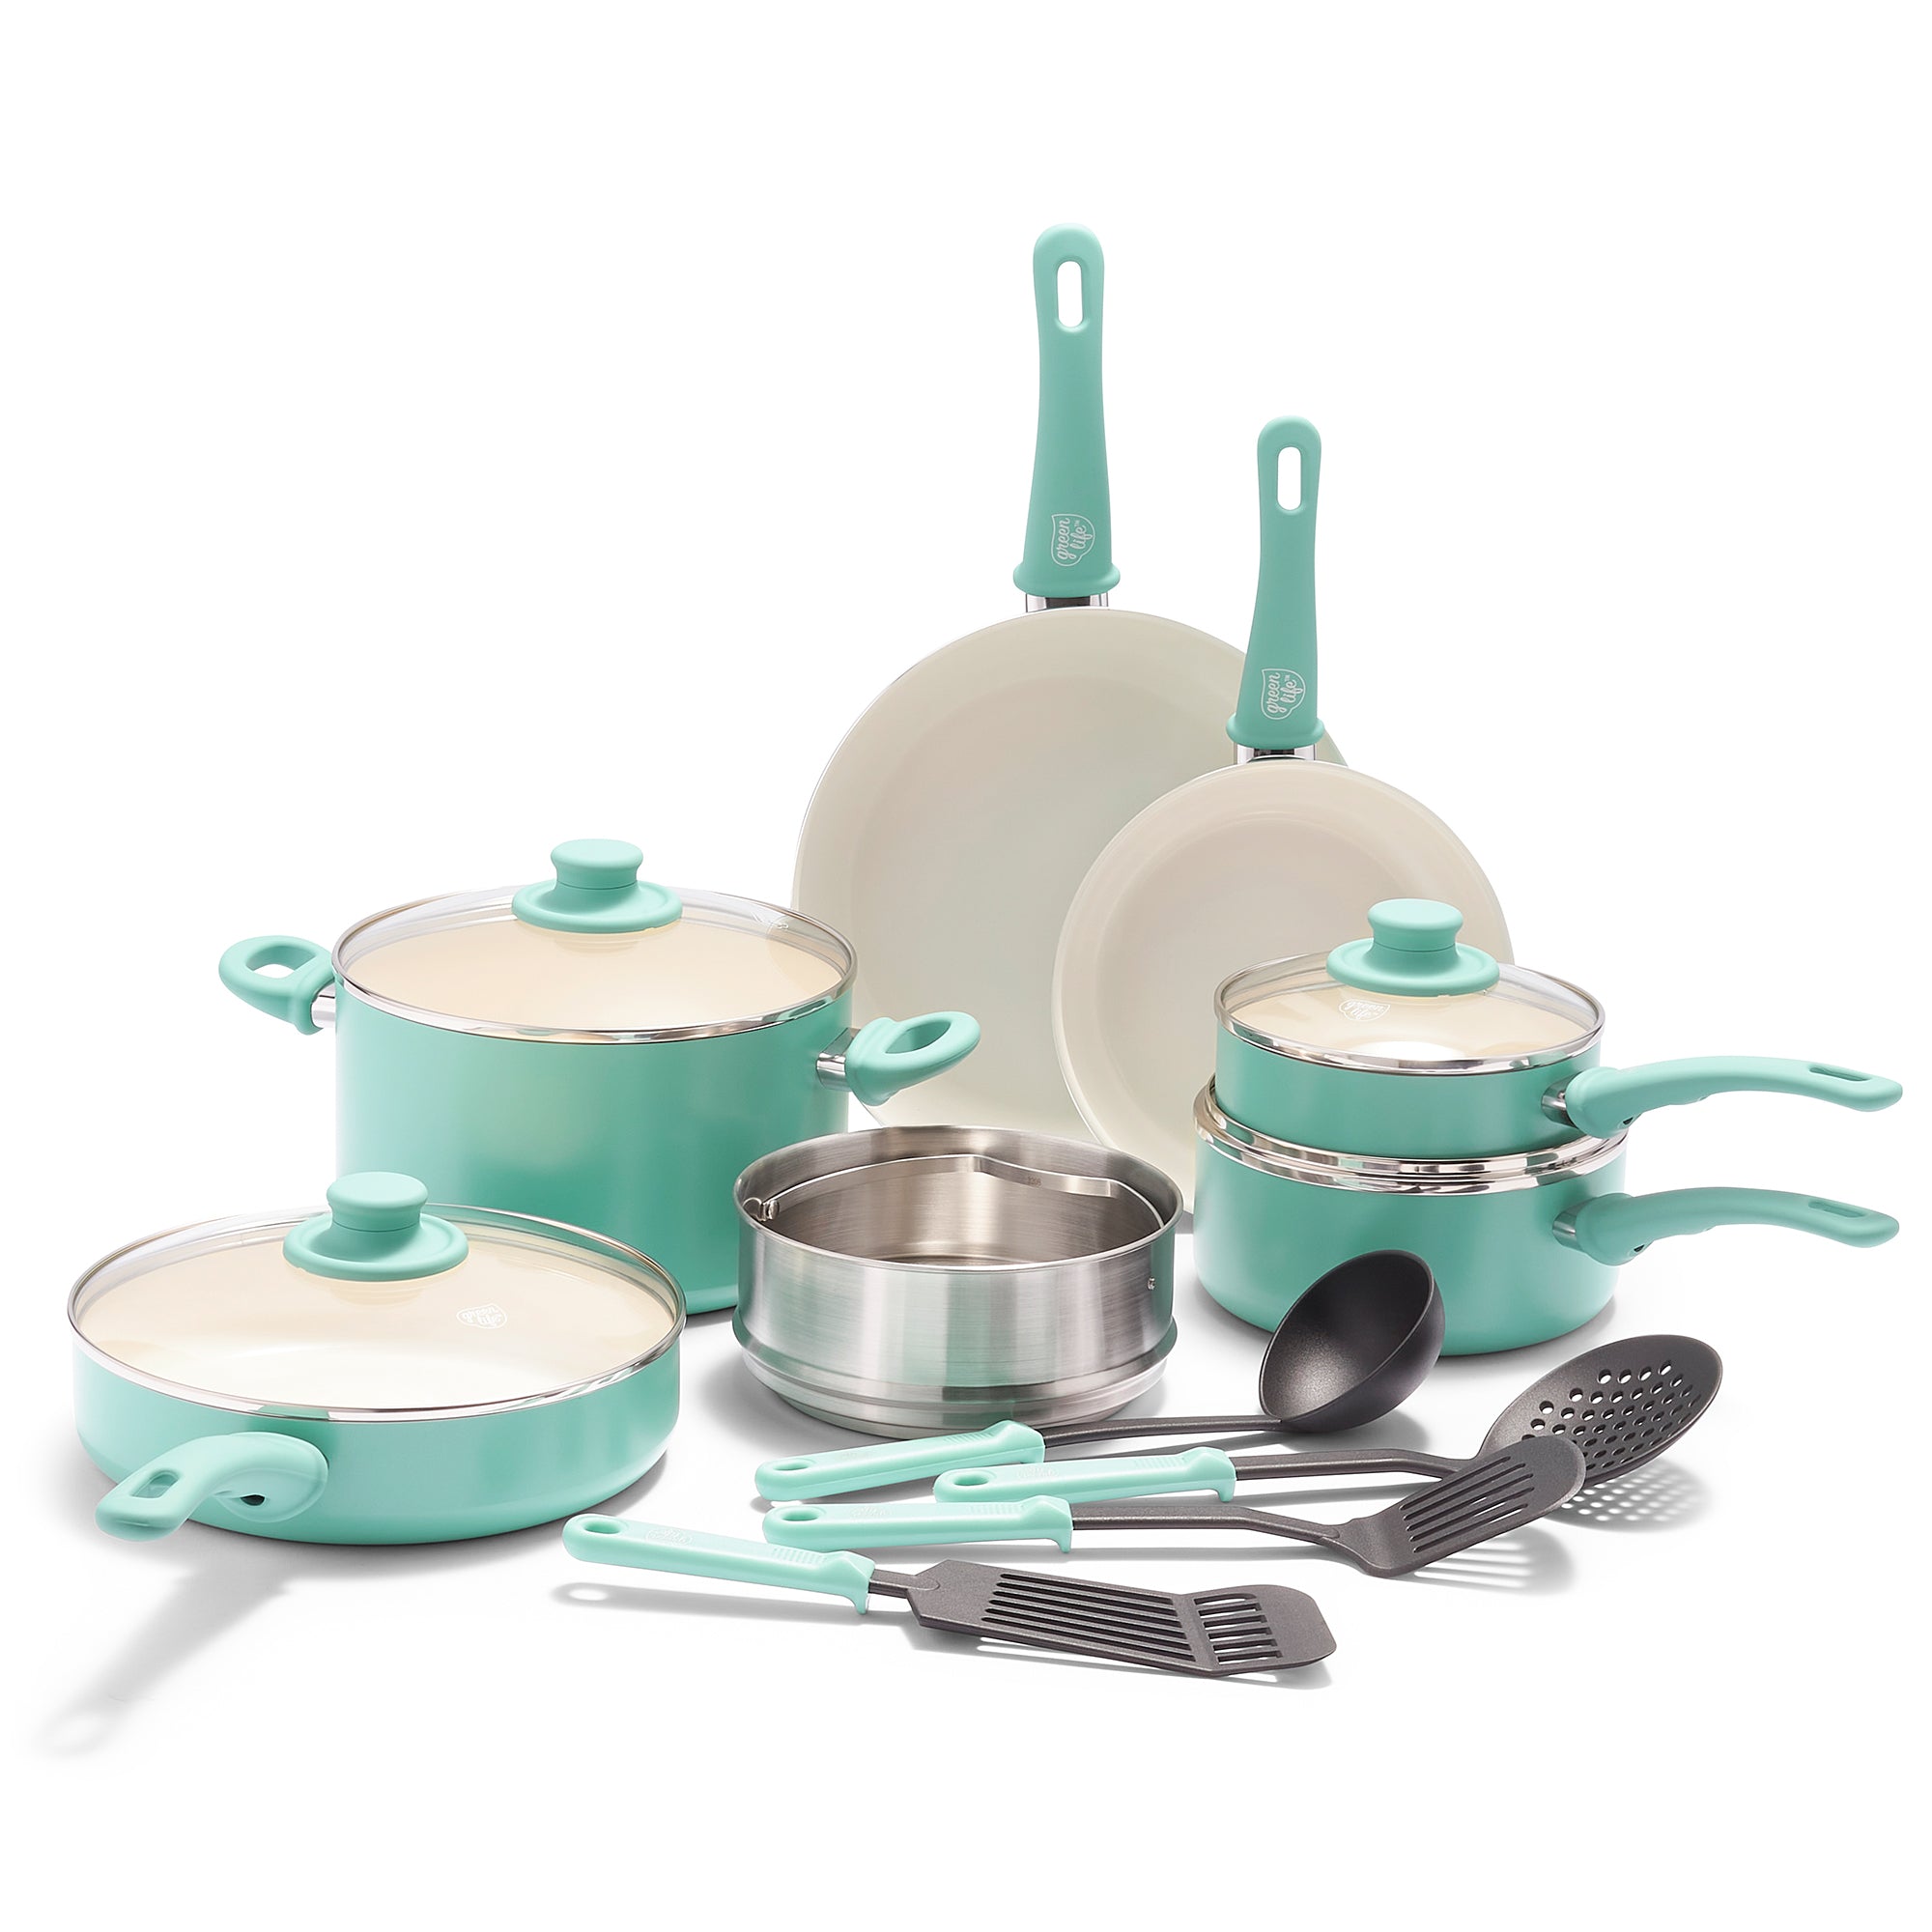 GreenLife 18-Piece Soft Grip Toxin-Free Healthy Ceramic Non-Stick Cookware Set, Yellow, Dishwasher Safe